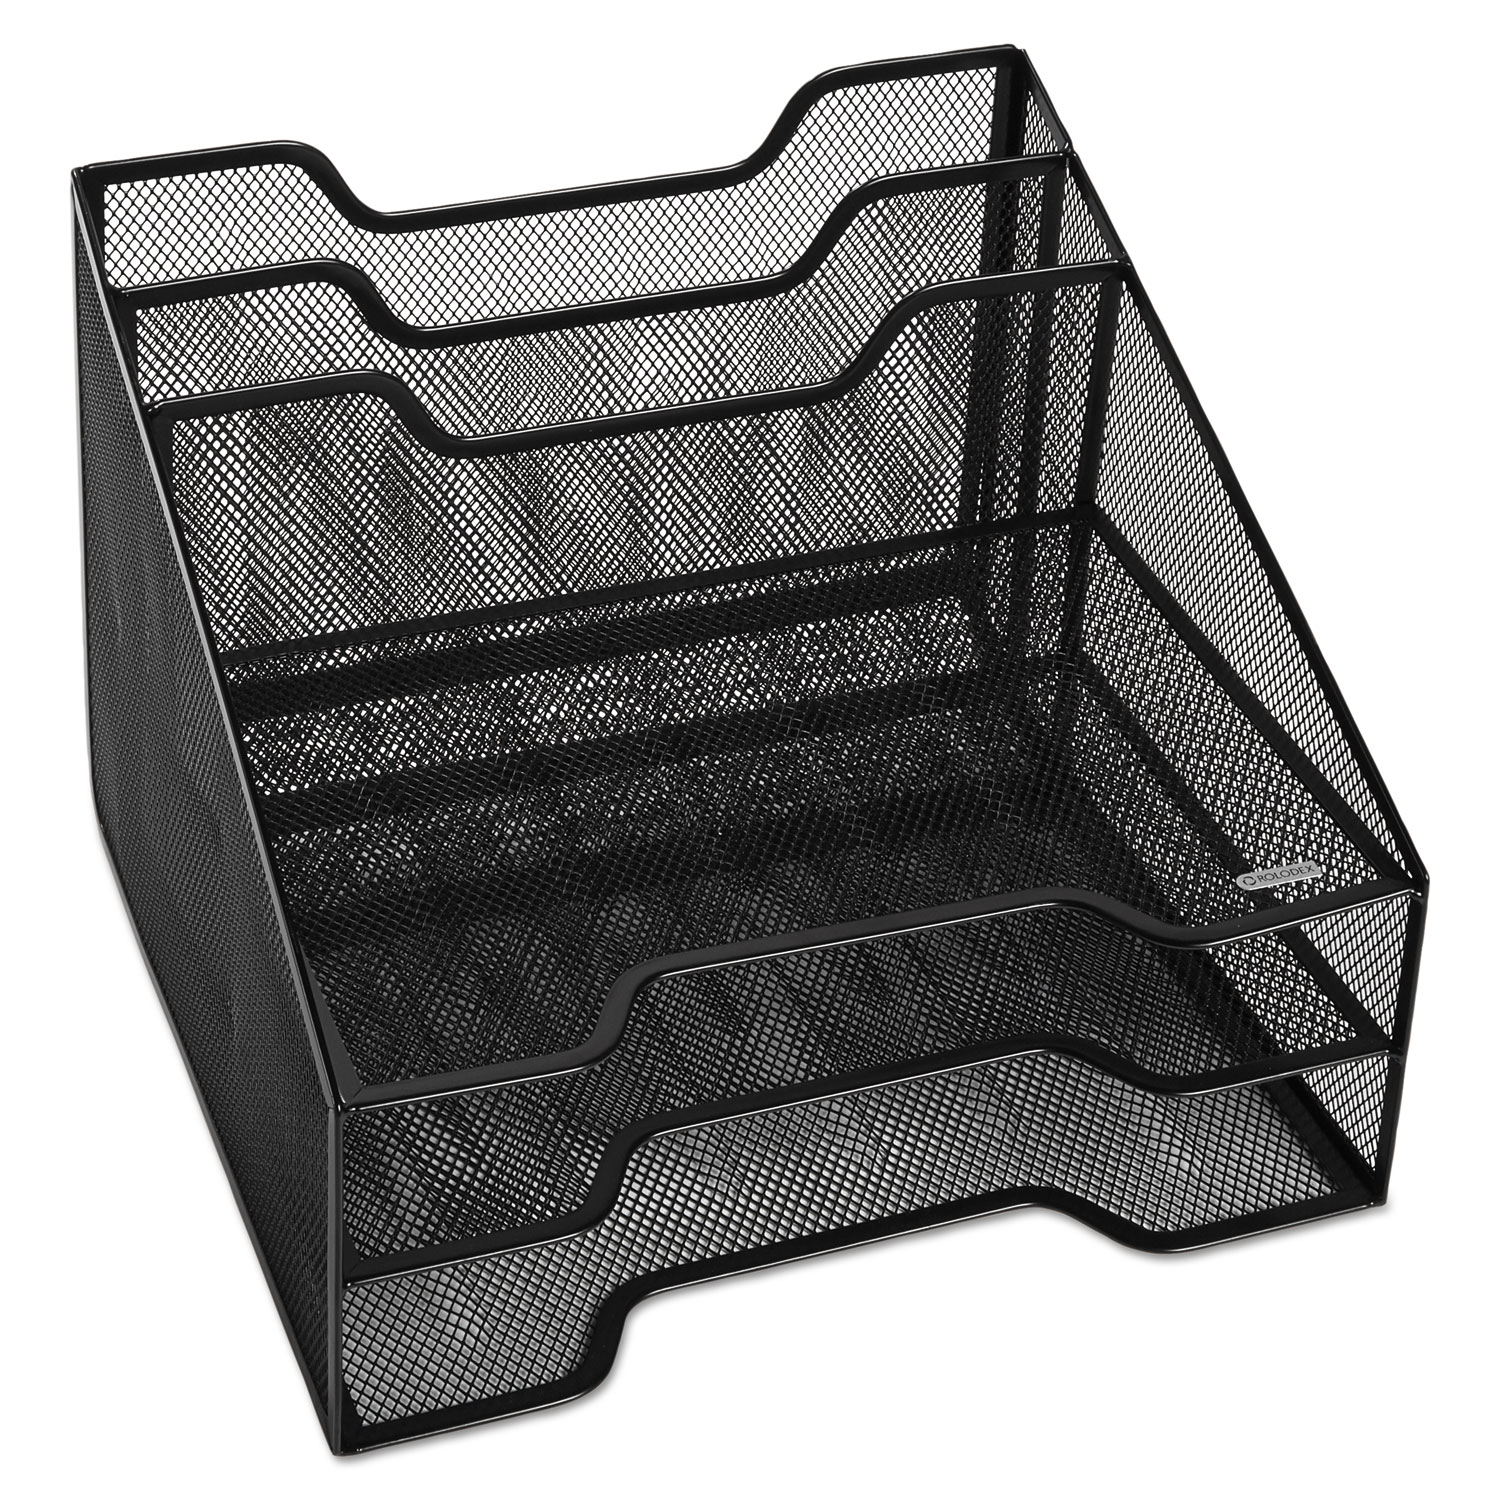  Rolodex 1742322 Mesh Tray Sorter Combo, 5 Sections, Letter Size Files, 12.5 x 11.5 x 9.5, Black (ROL1742322) 